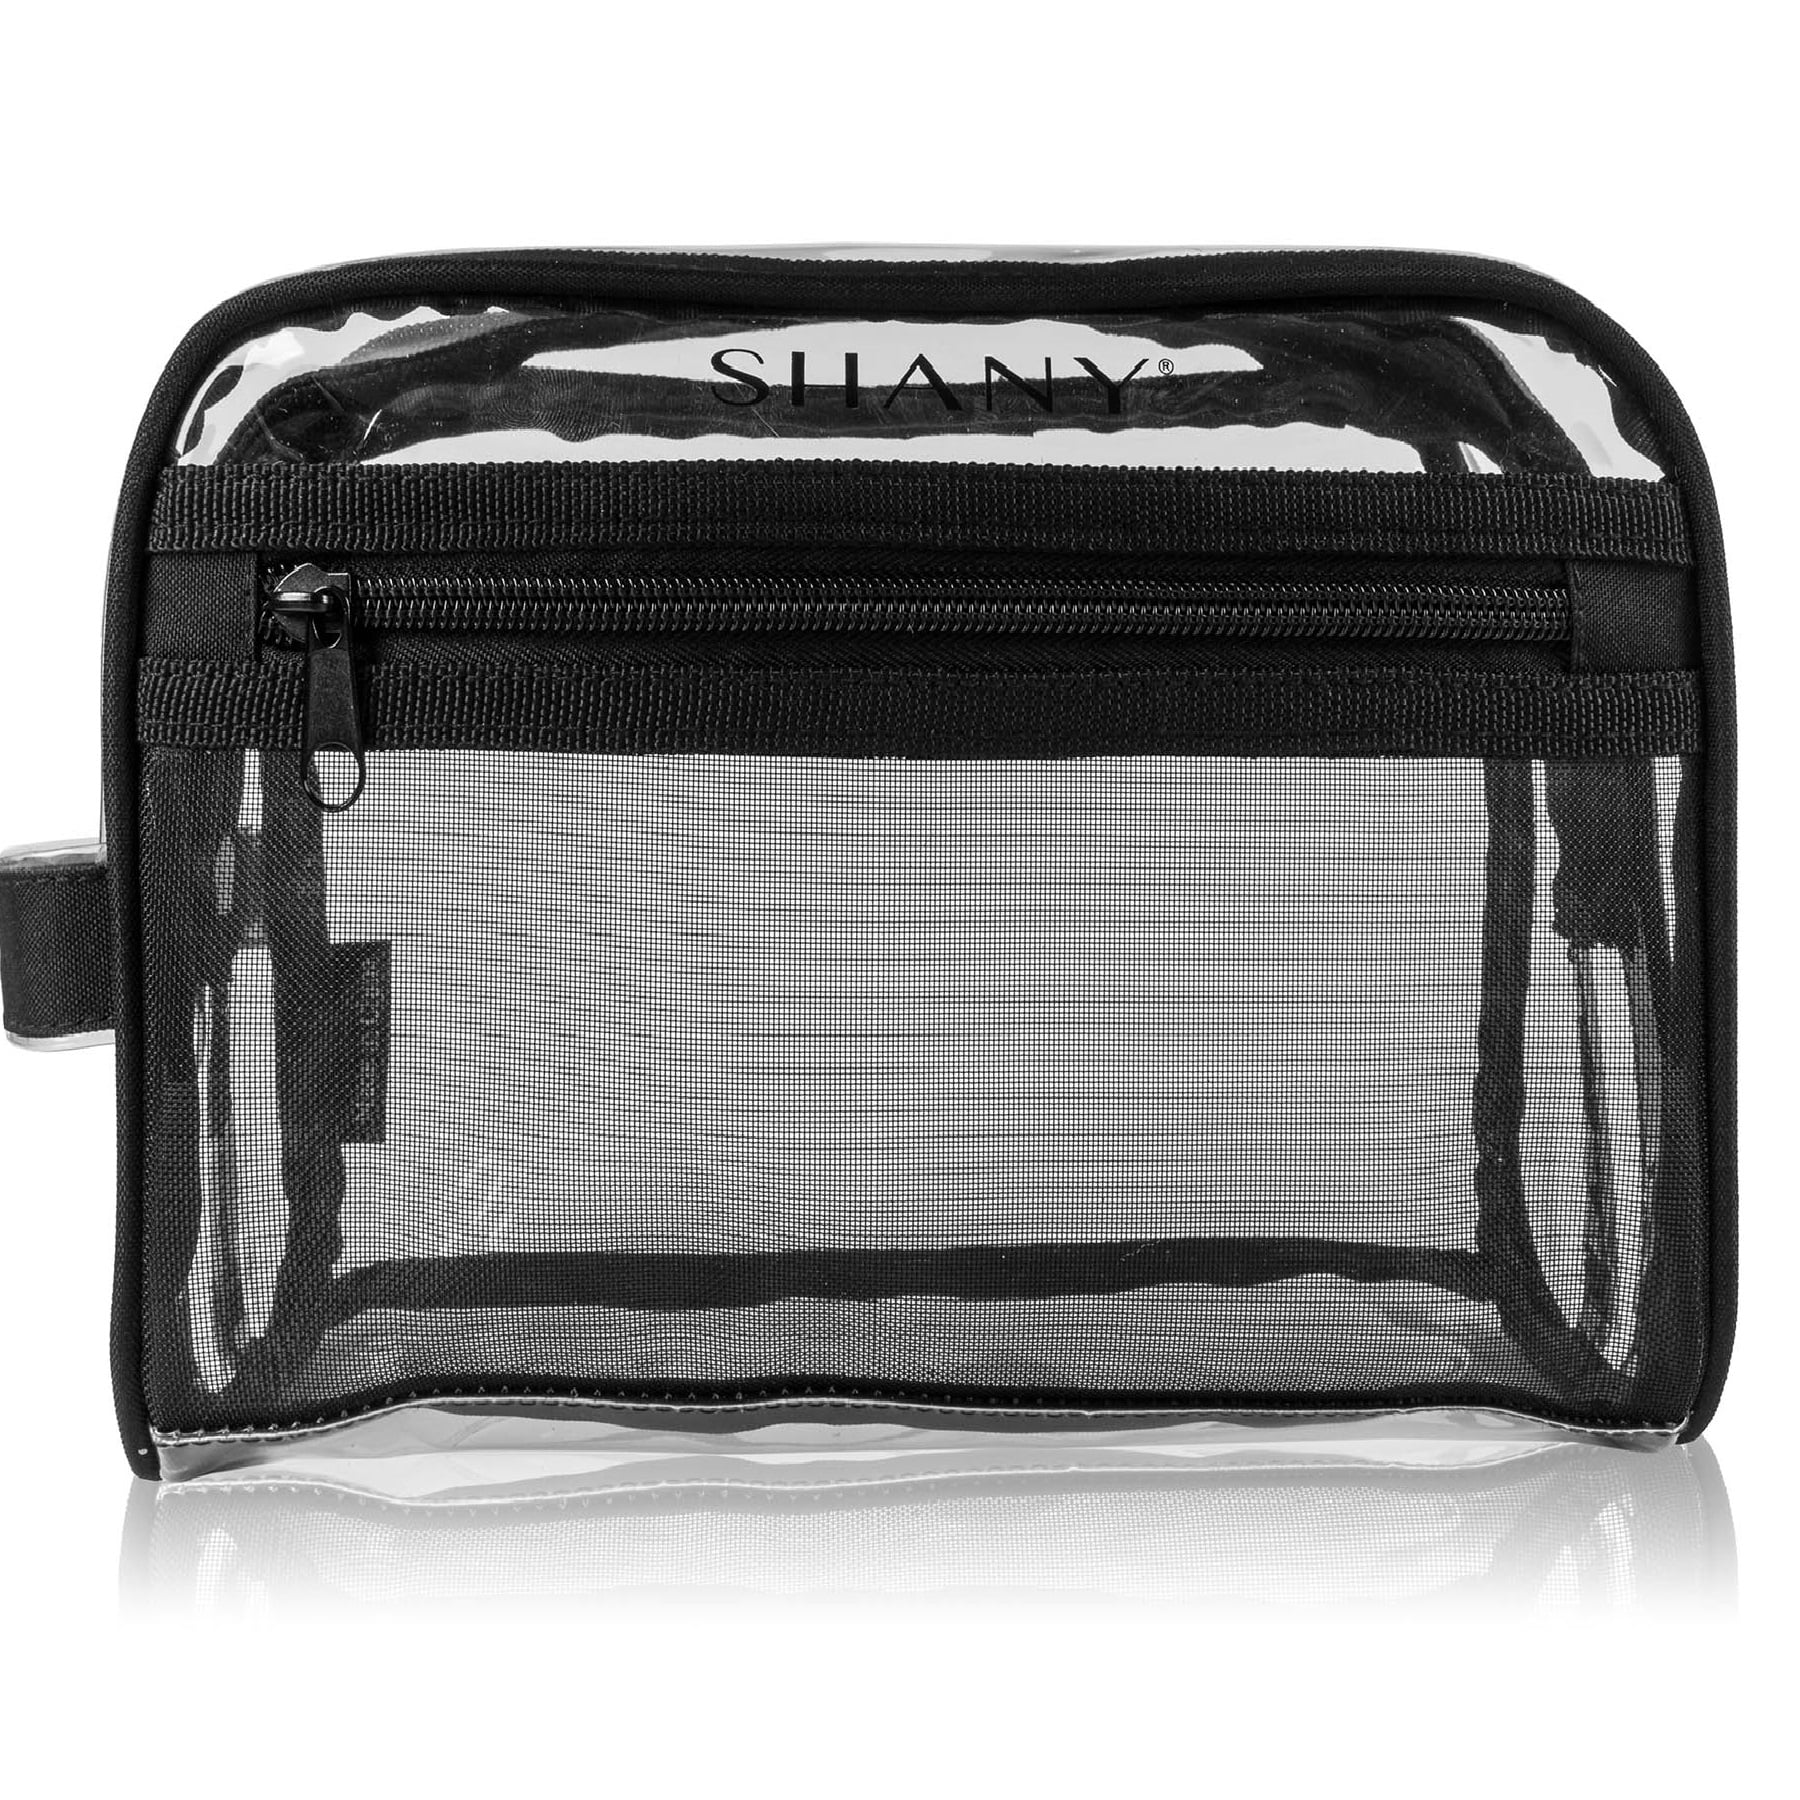 Black Mesh Medium Nontoxic Travel Organizer with Handle SHANY Clear Toiletry and Makeup Bag with Plastic Mesh Pocket 